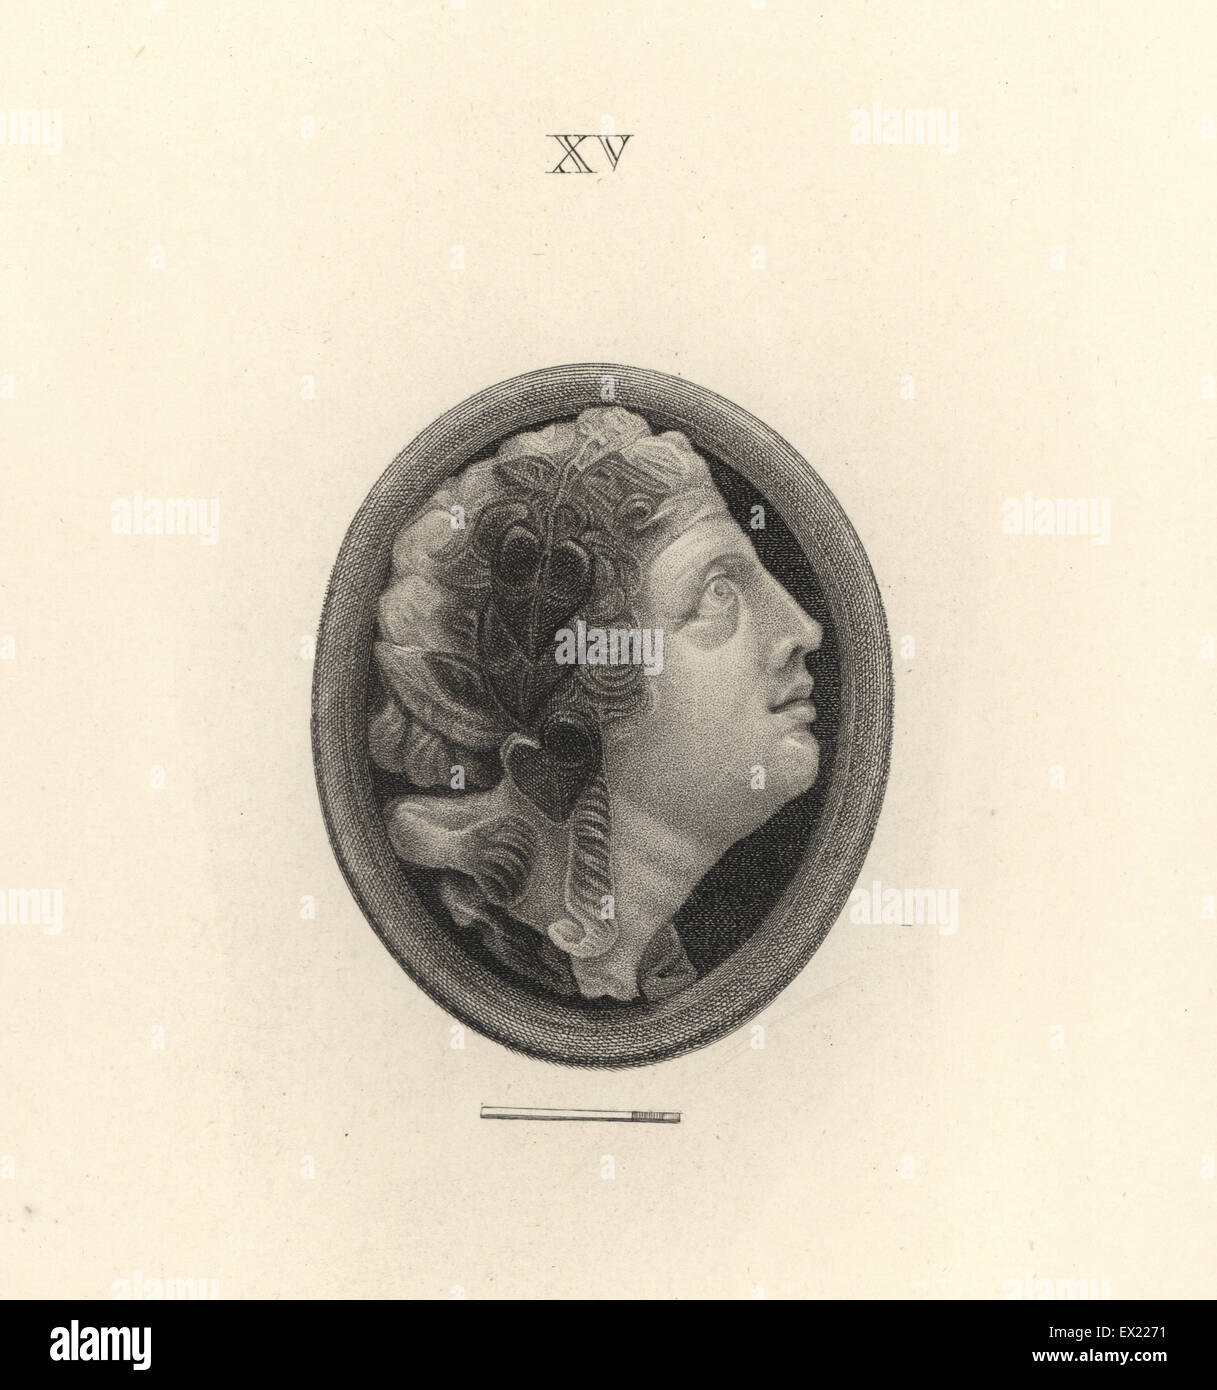 Head of a Bacchante with vineleaves in her hair. Copperplate engraving by Francesco Bartolozzi from 108 Plates of Antique Gems, 1860. The gems were from the Duke of Marlborough's collection. Stock Photo